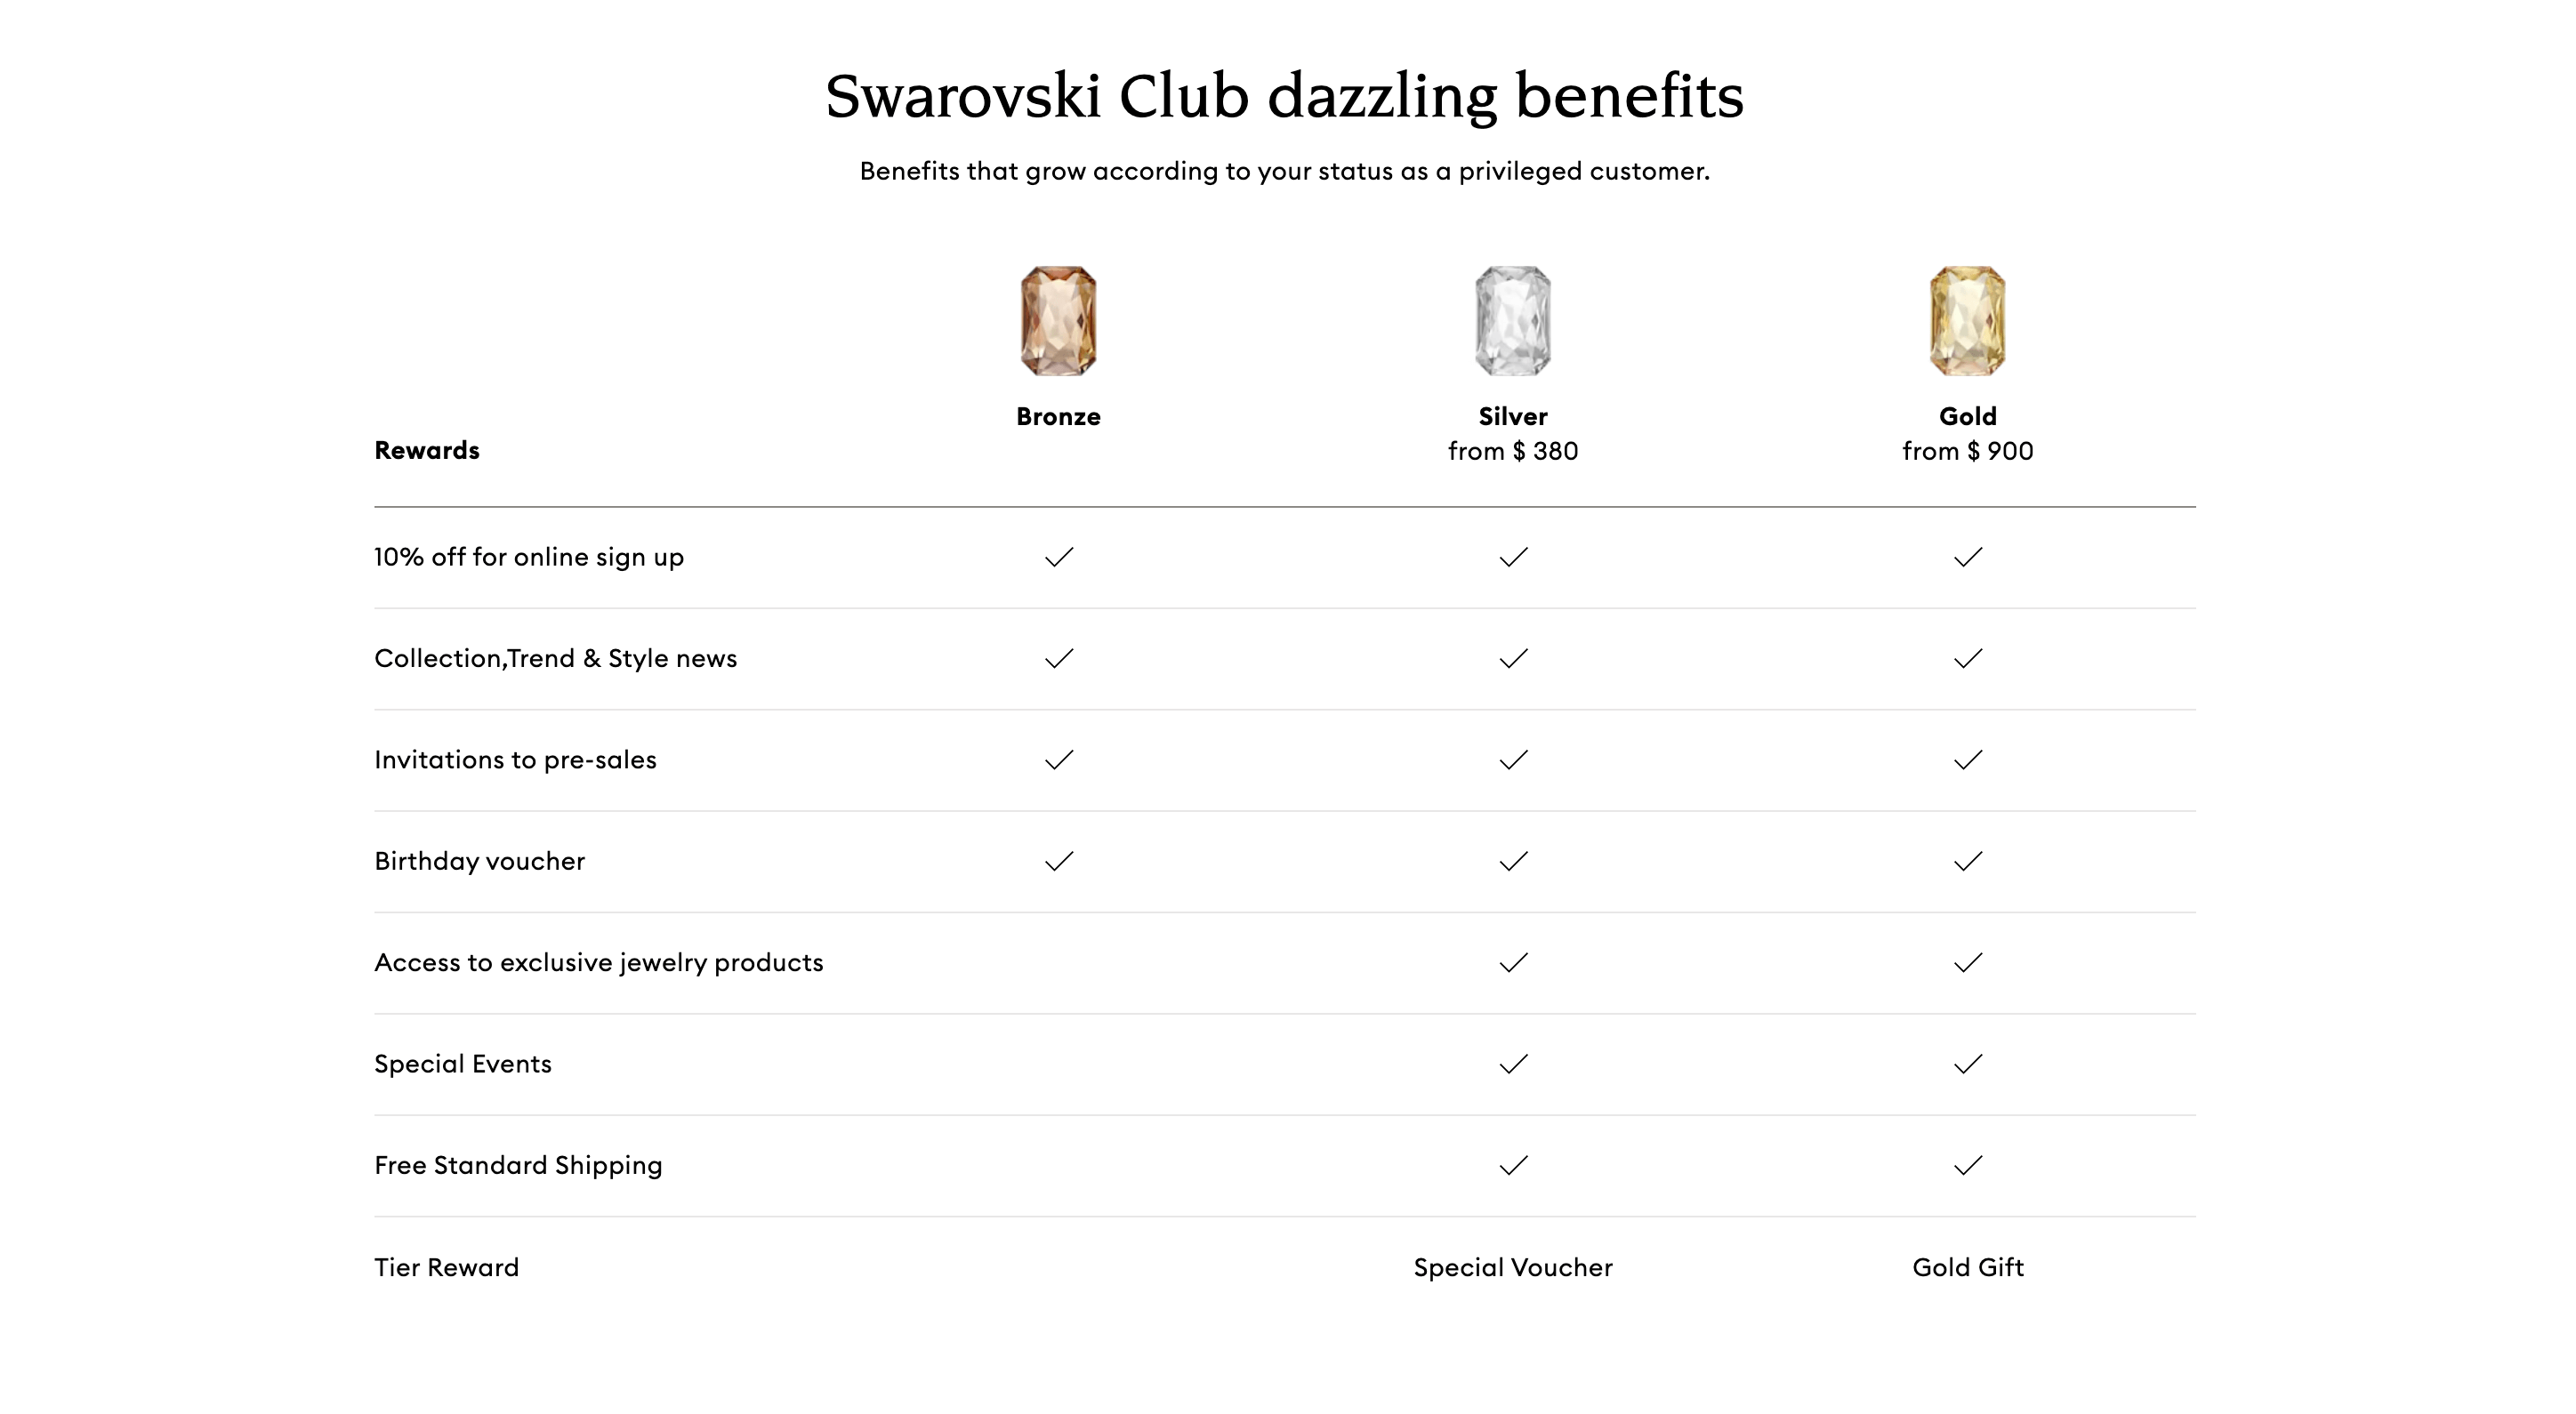 A screenshot of a chart from the Swarovski Club explainer page showing the 3 VIP tiers and the benefits for each.